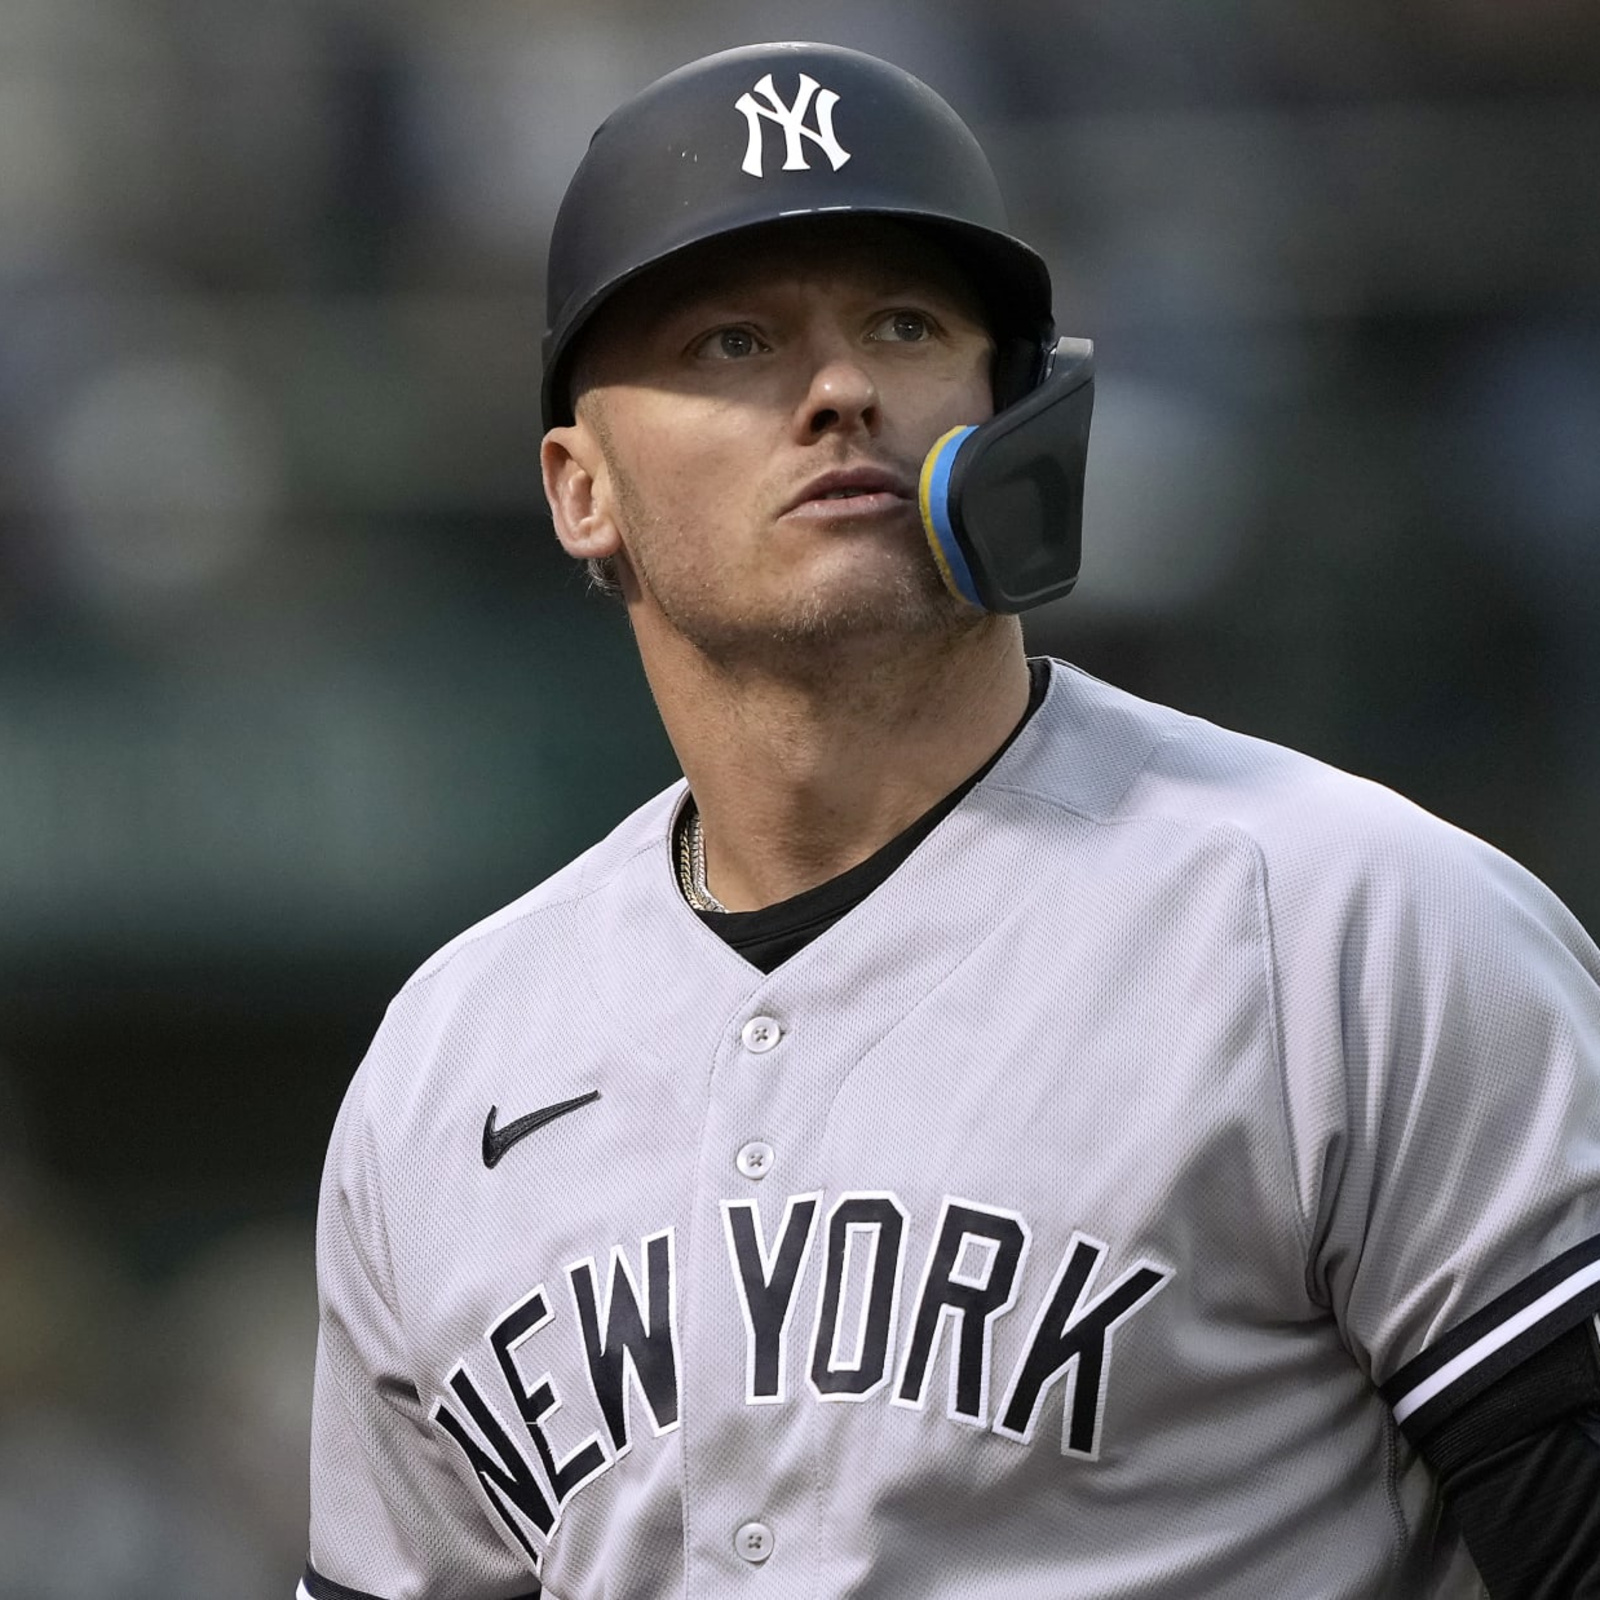 Yankees Notebook: Josh Donaldson's future unclear due to calf injury